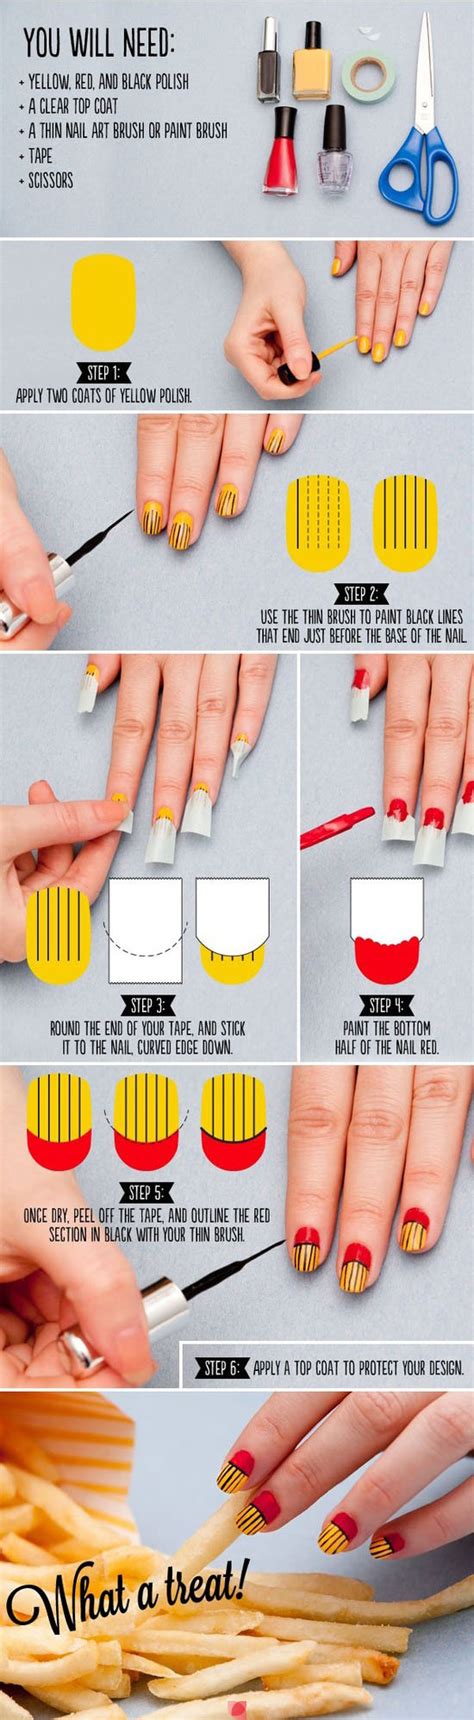 DIY Nails Pictures Photos And Images For Facebook Tumblr Pinterest And Twitter